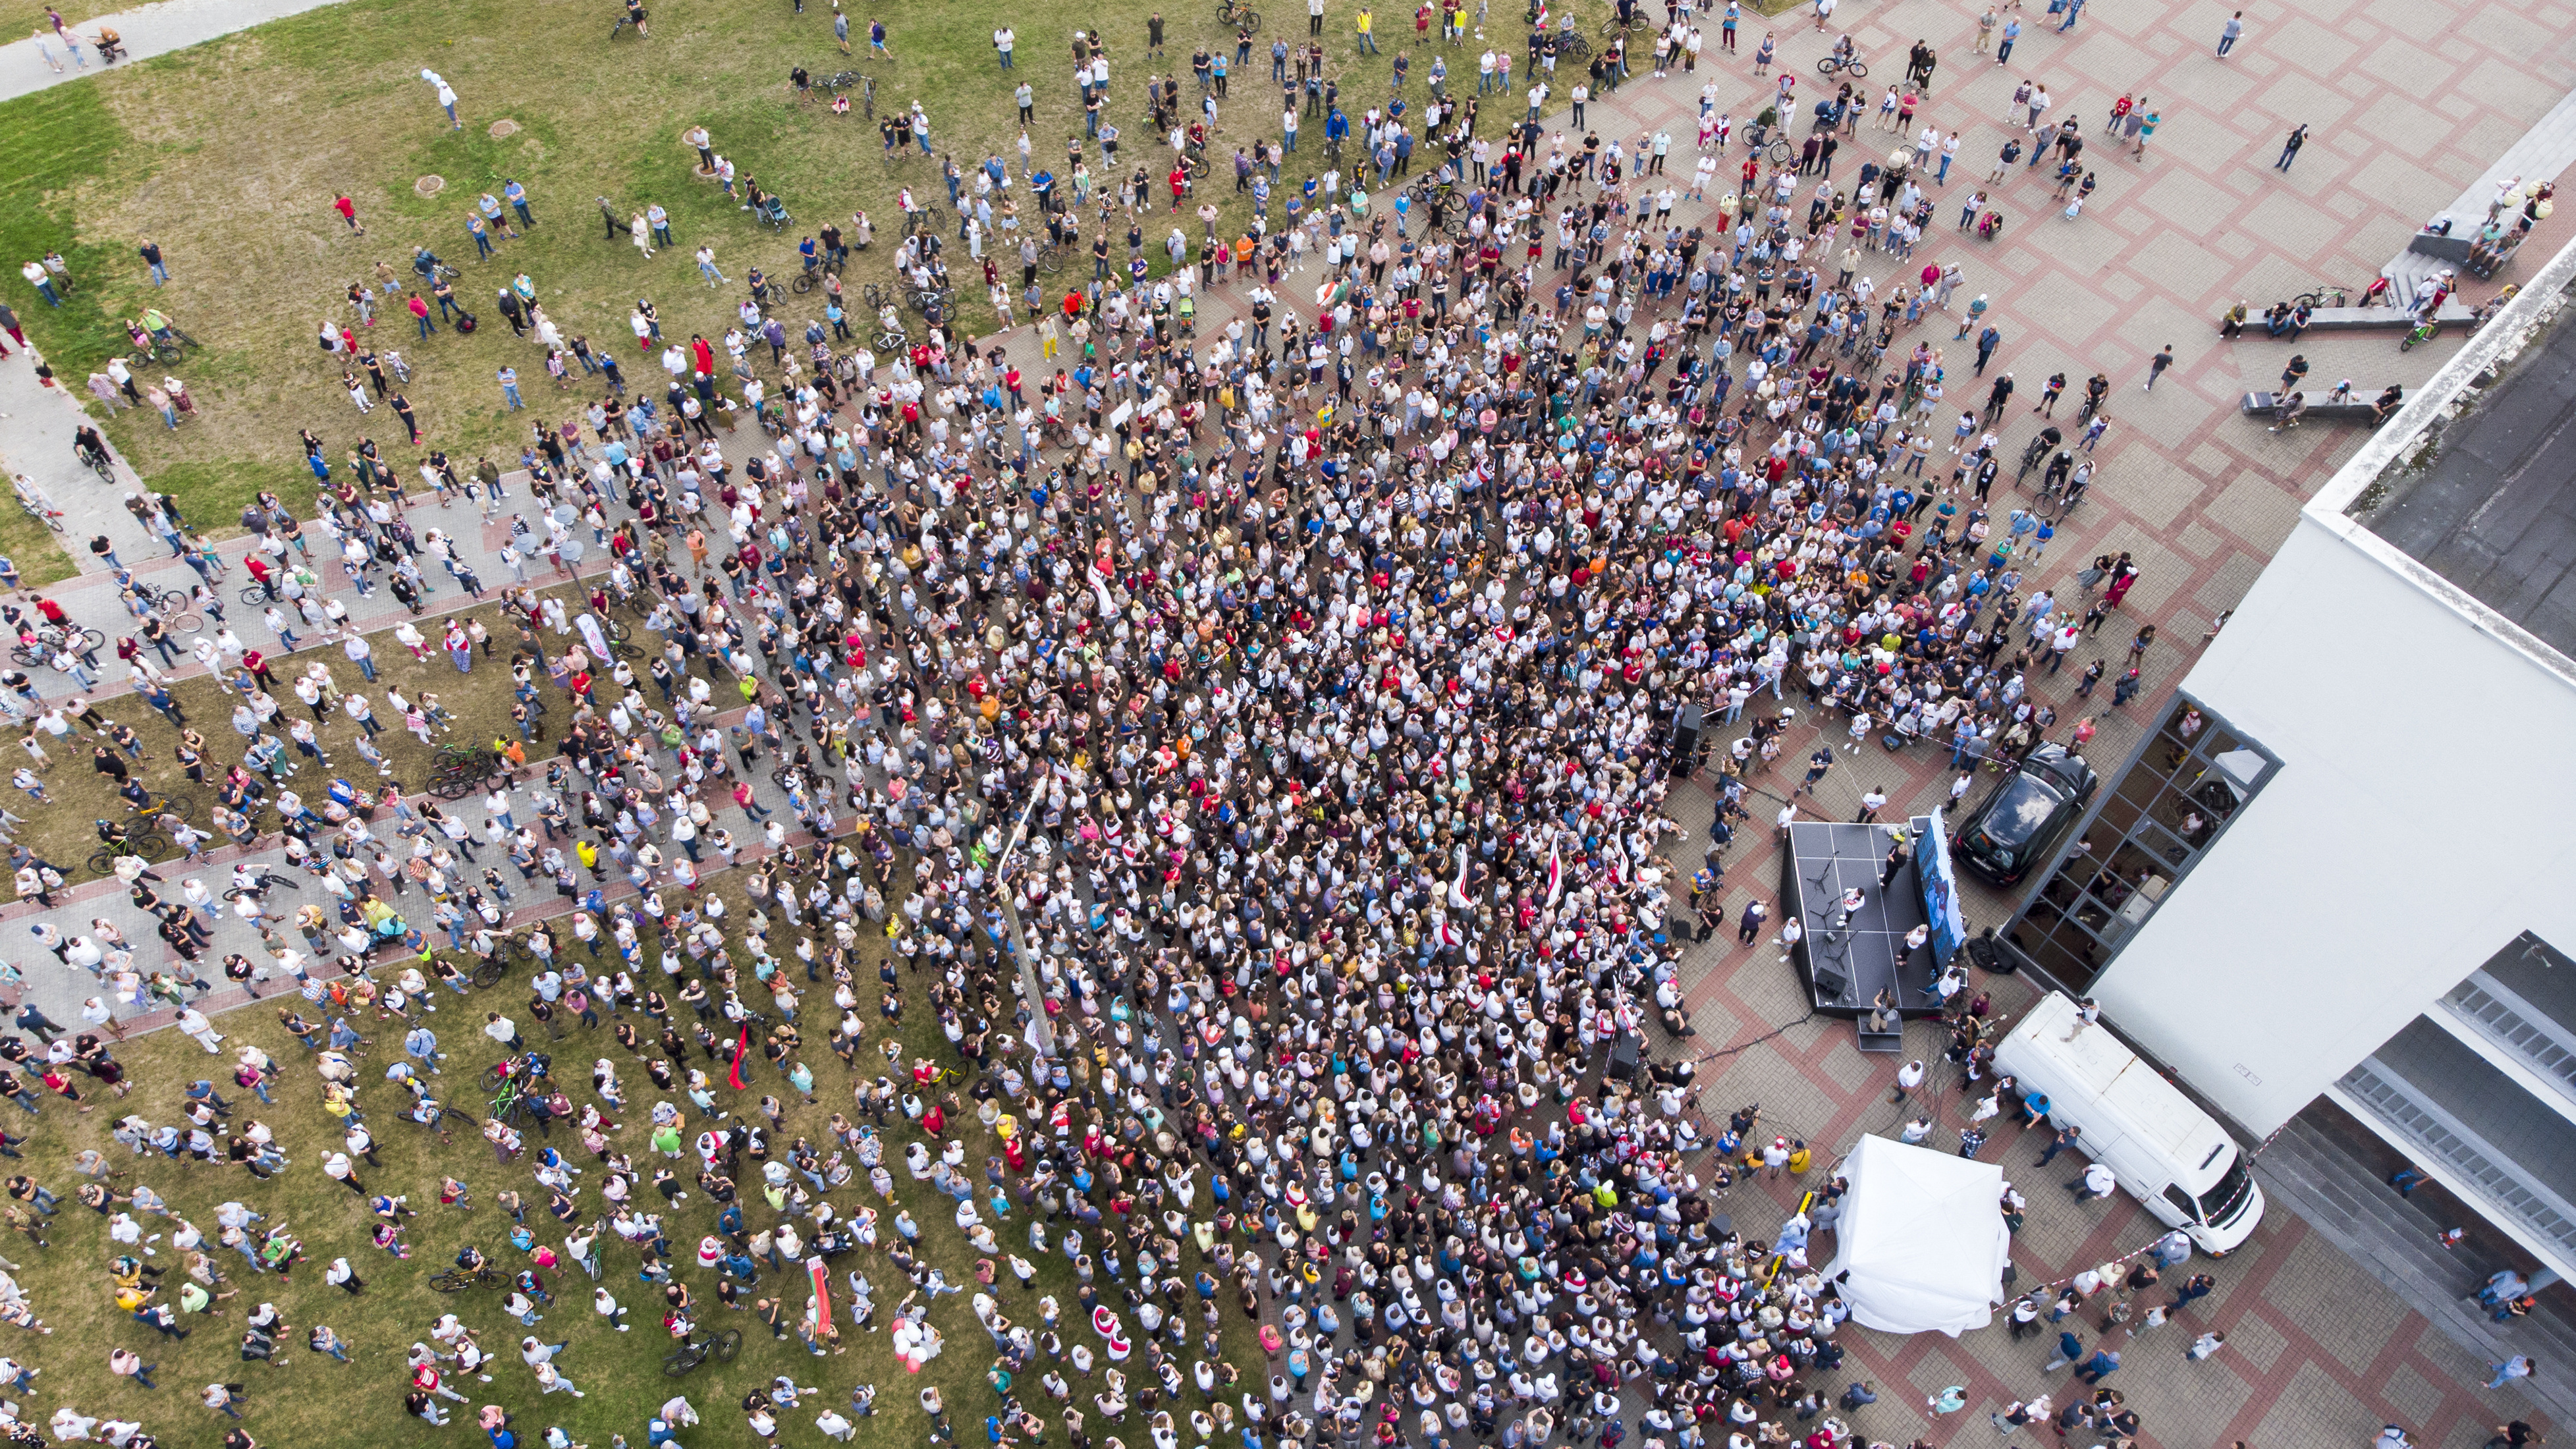 Arial view of a crowd of people